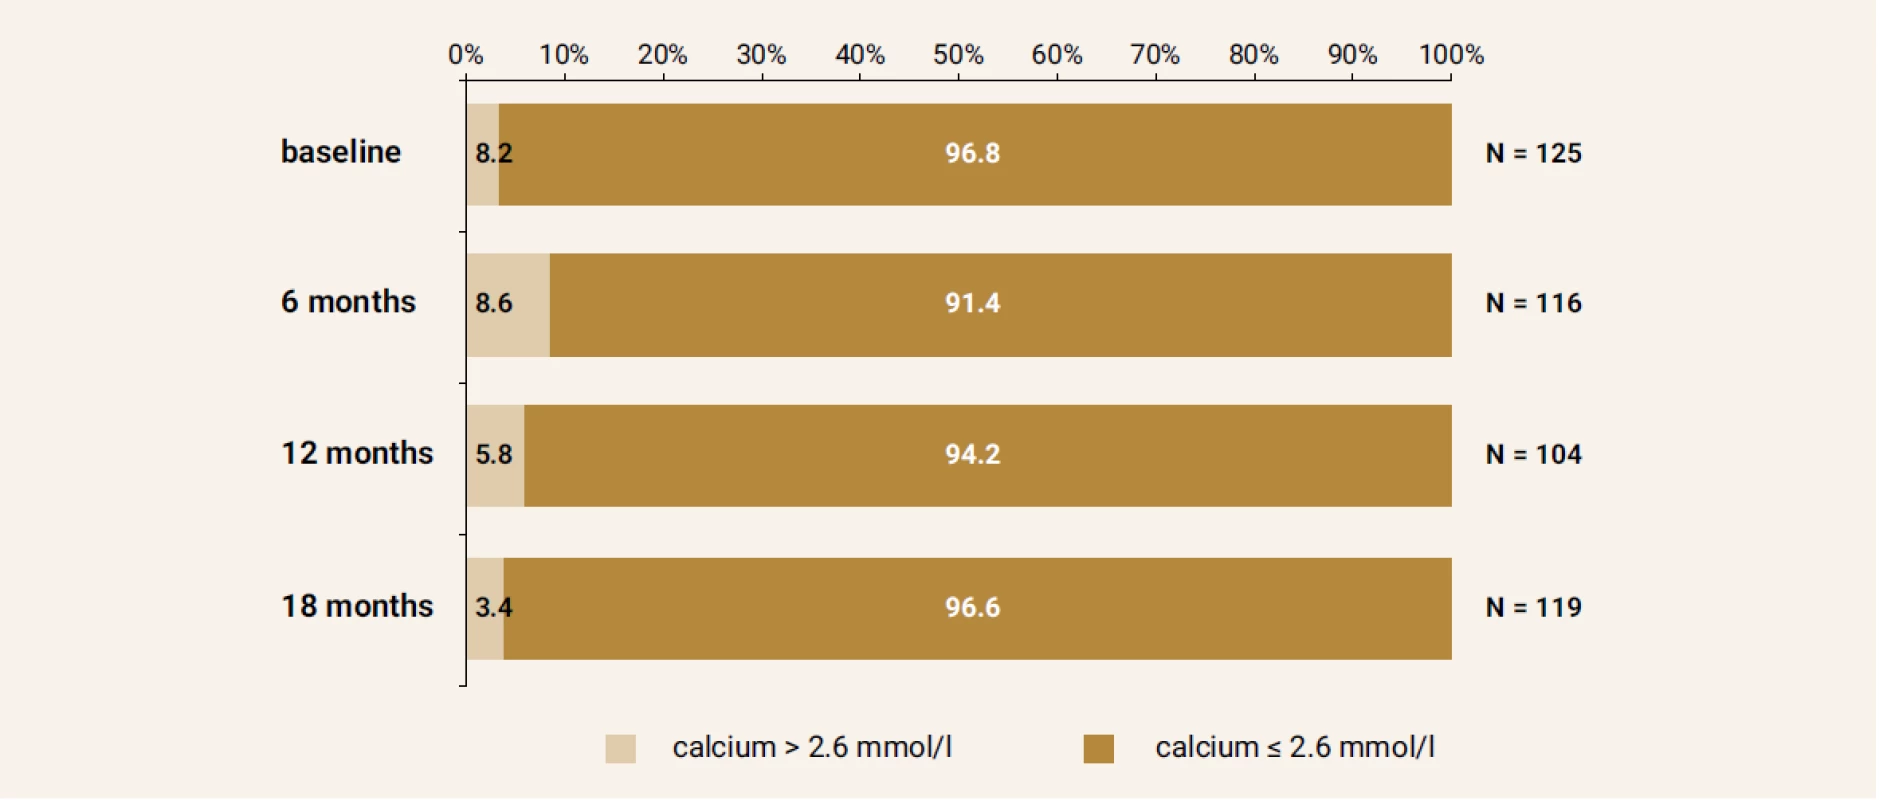 Calcium levels at the baseline and after 6,12 and 18 months of treatment